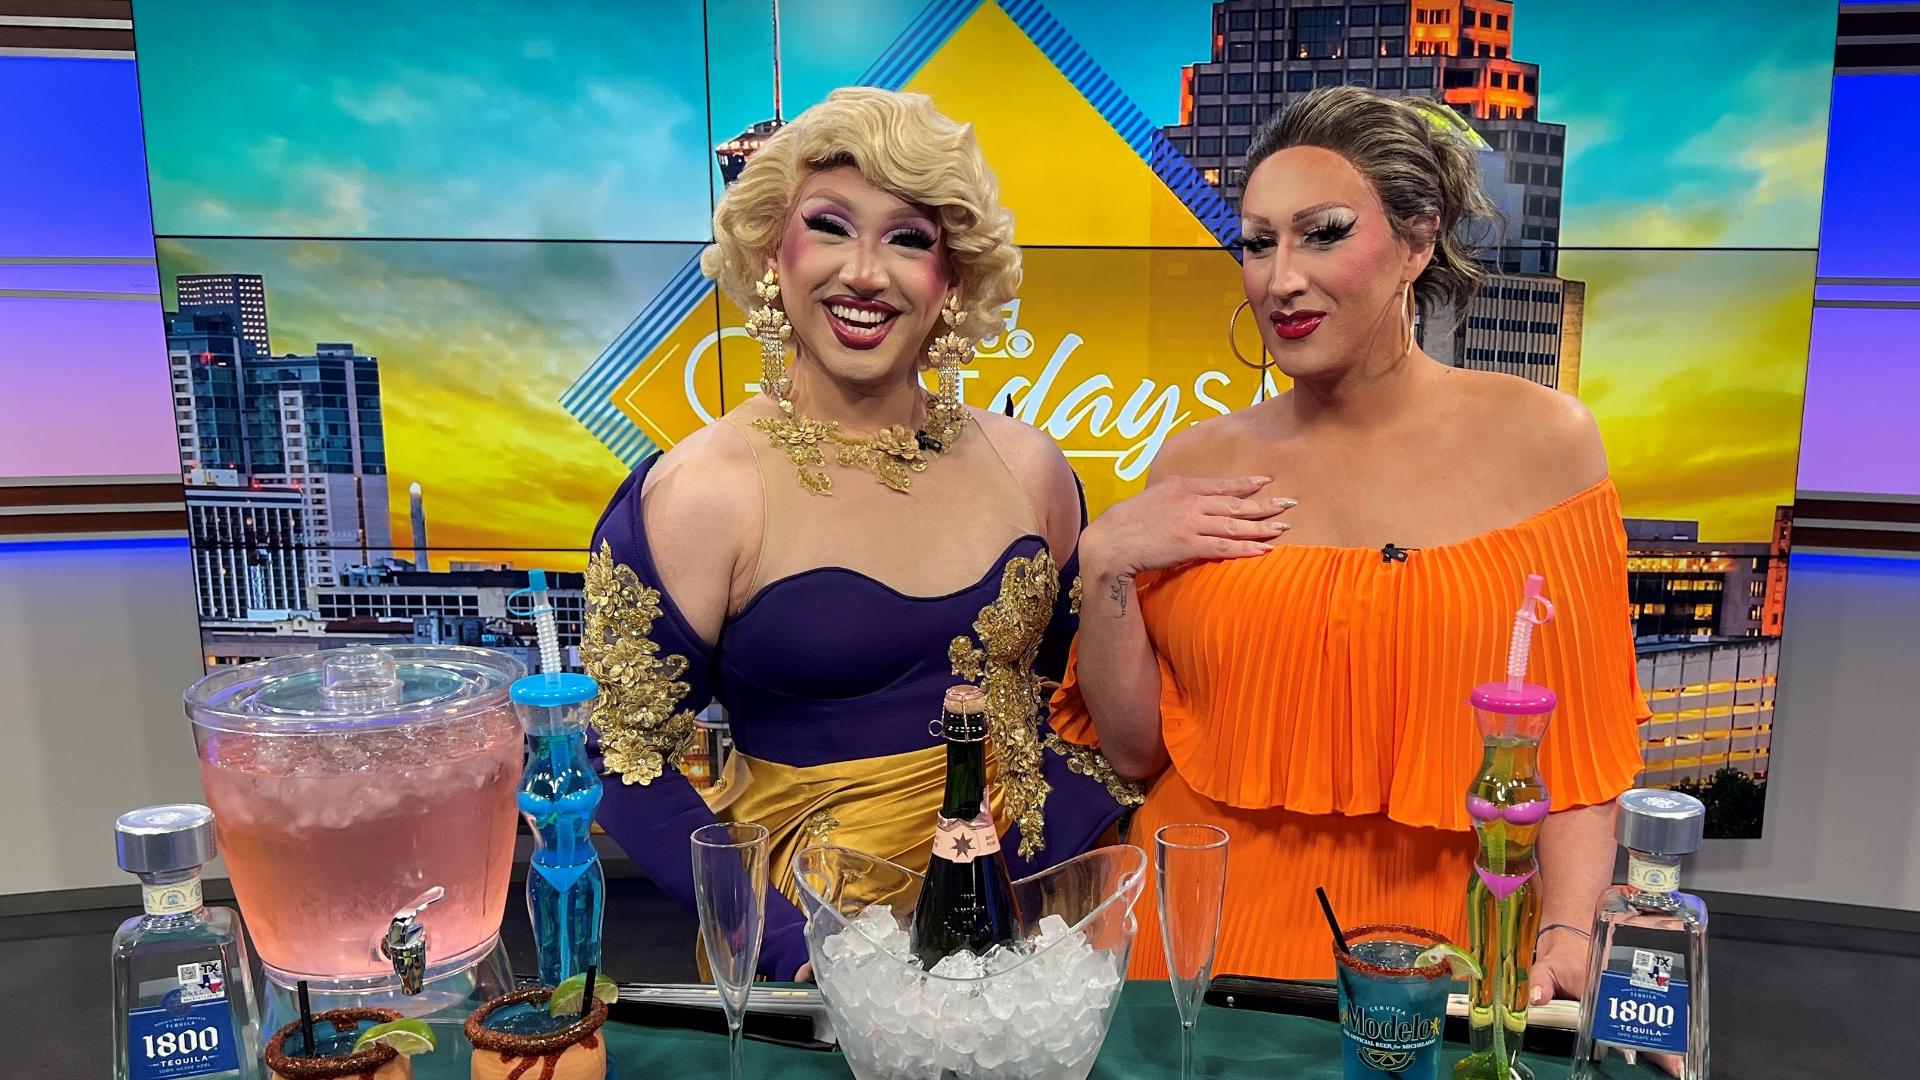 Drag Brunch Show Director Kristi Waters shares what people can expect at Let's Be Honest. Plus, a special performance by Chyna Cravens.